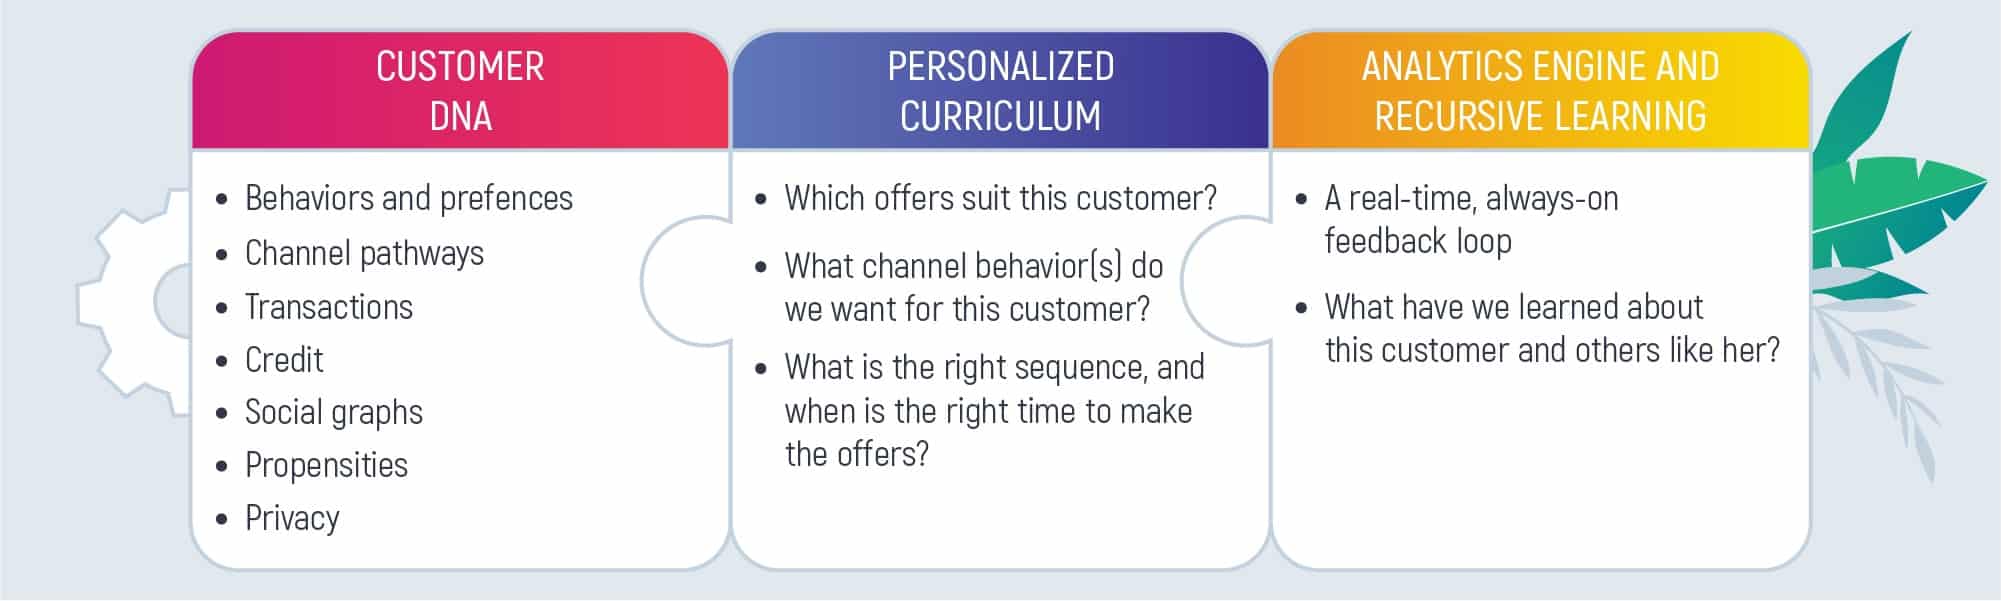 Customer DNA/Personlaized Curriculum/Analytics Engine and Recursive Learning